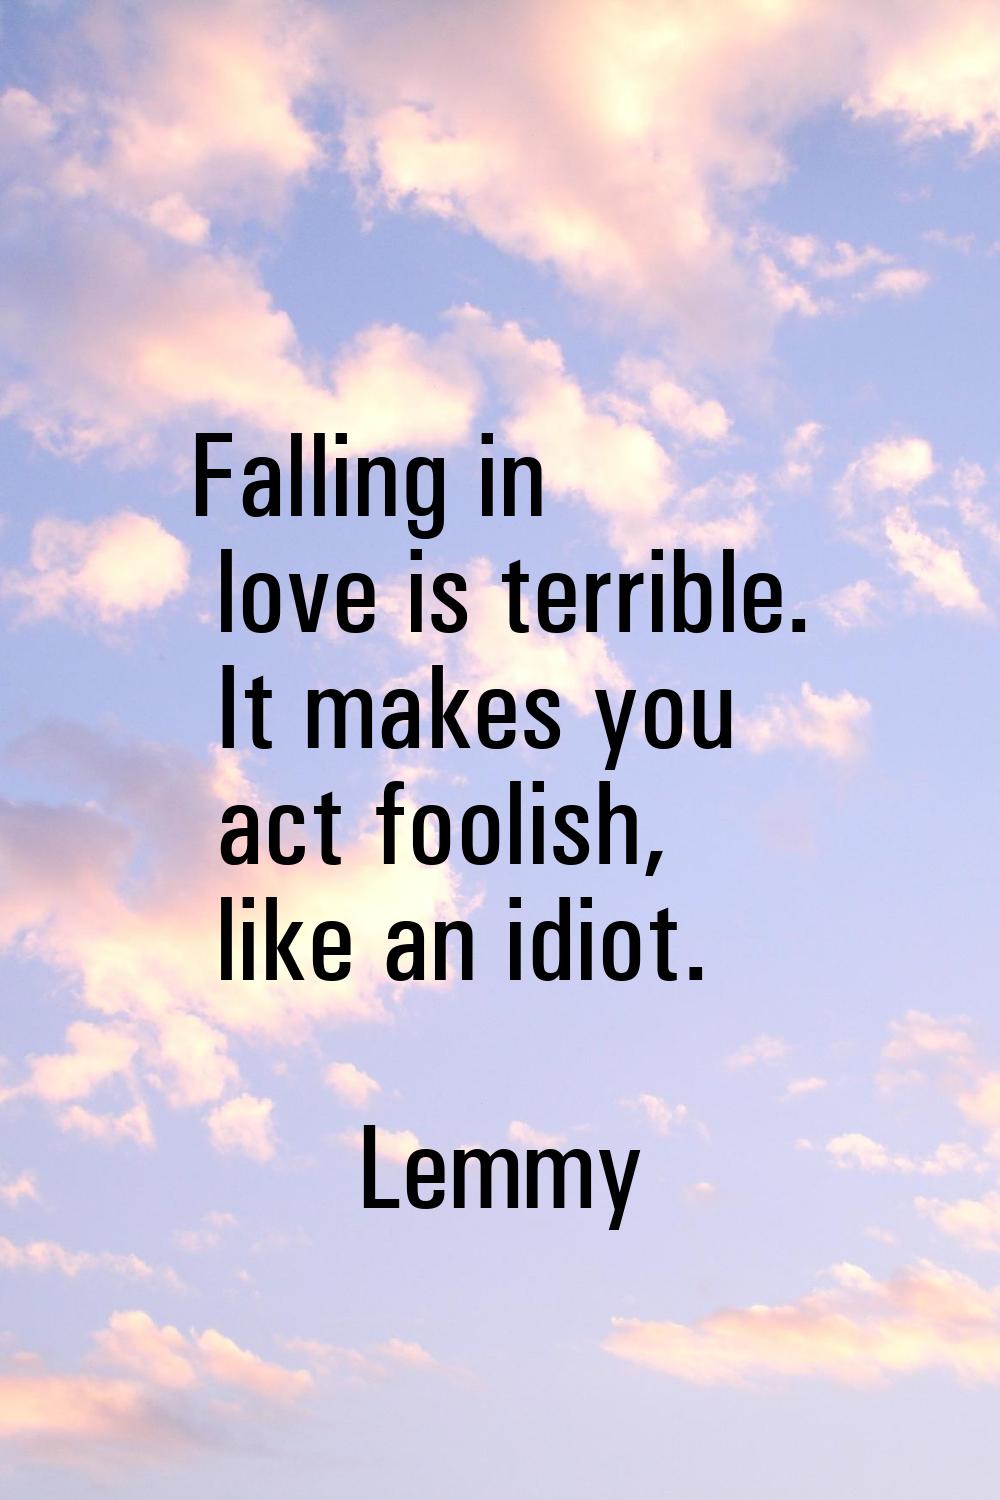 Falling in love is terrible. It makes you act foolish, like an idiot.